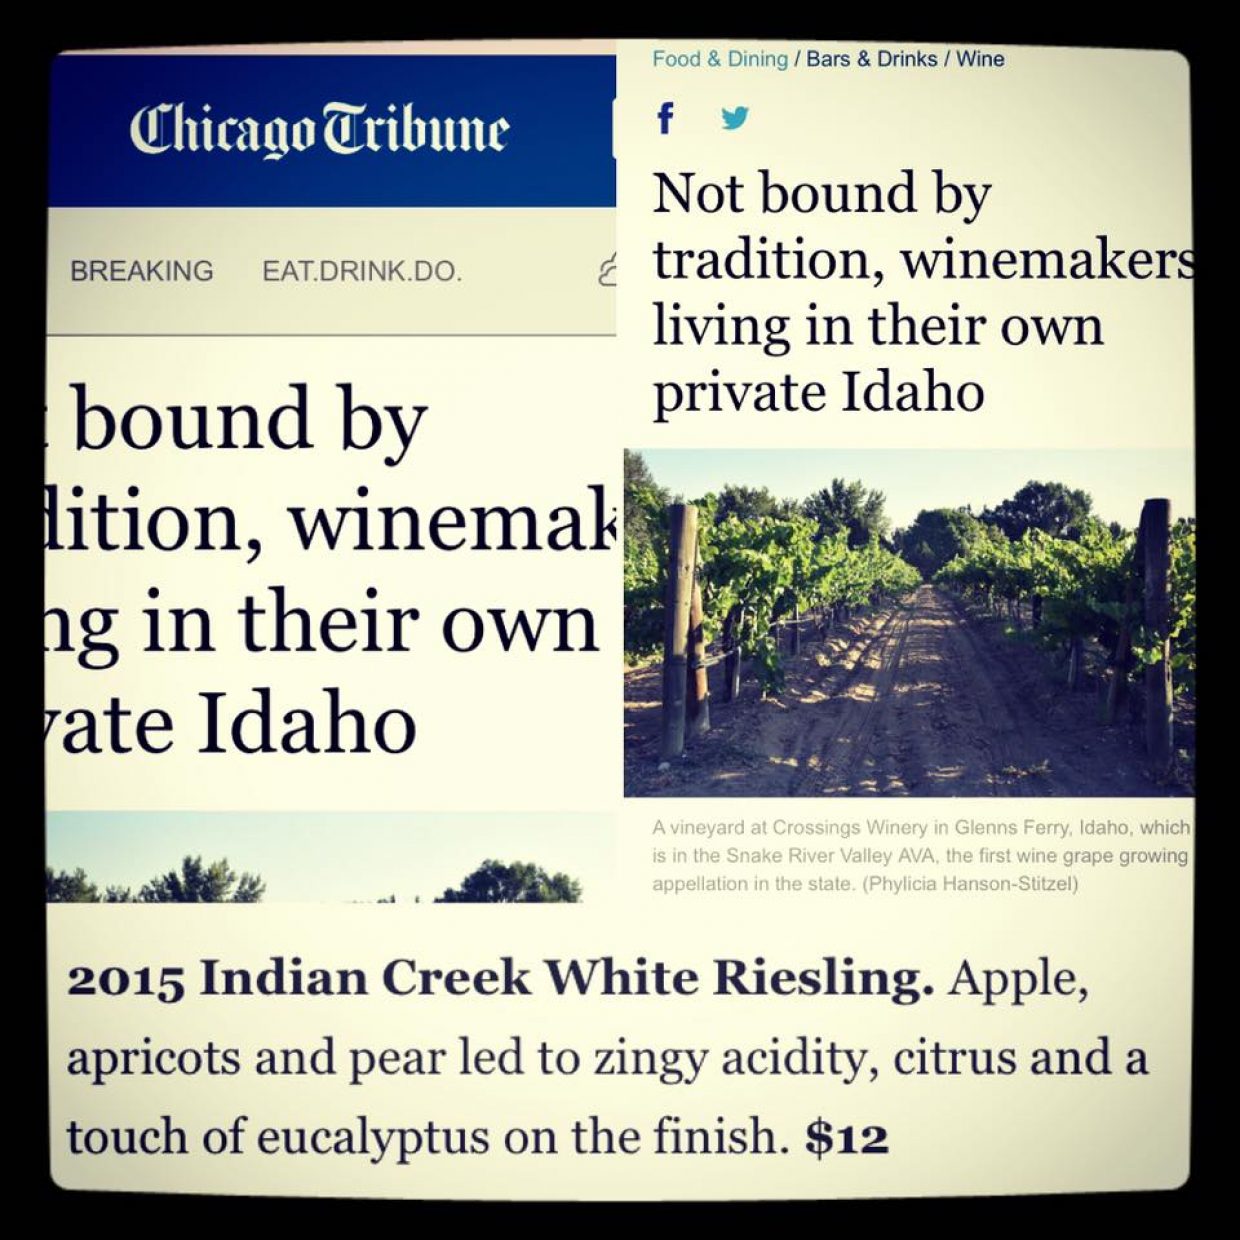 Rave Riesling review from the Chicago Tribune!